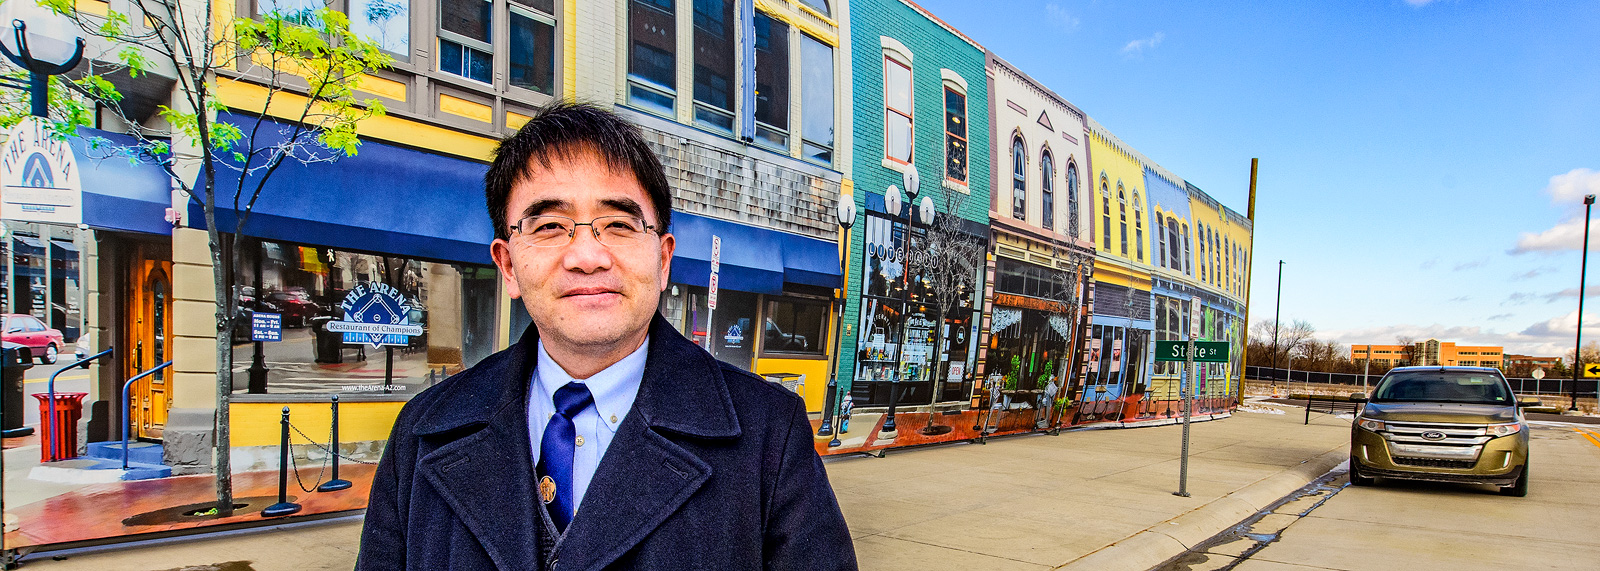 University of Michigan's Mobility Transformation Center Director Huei Peng at Mcity